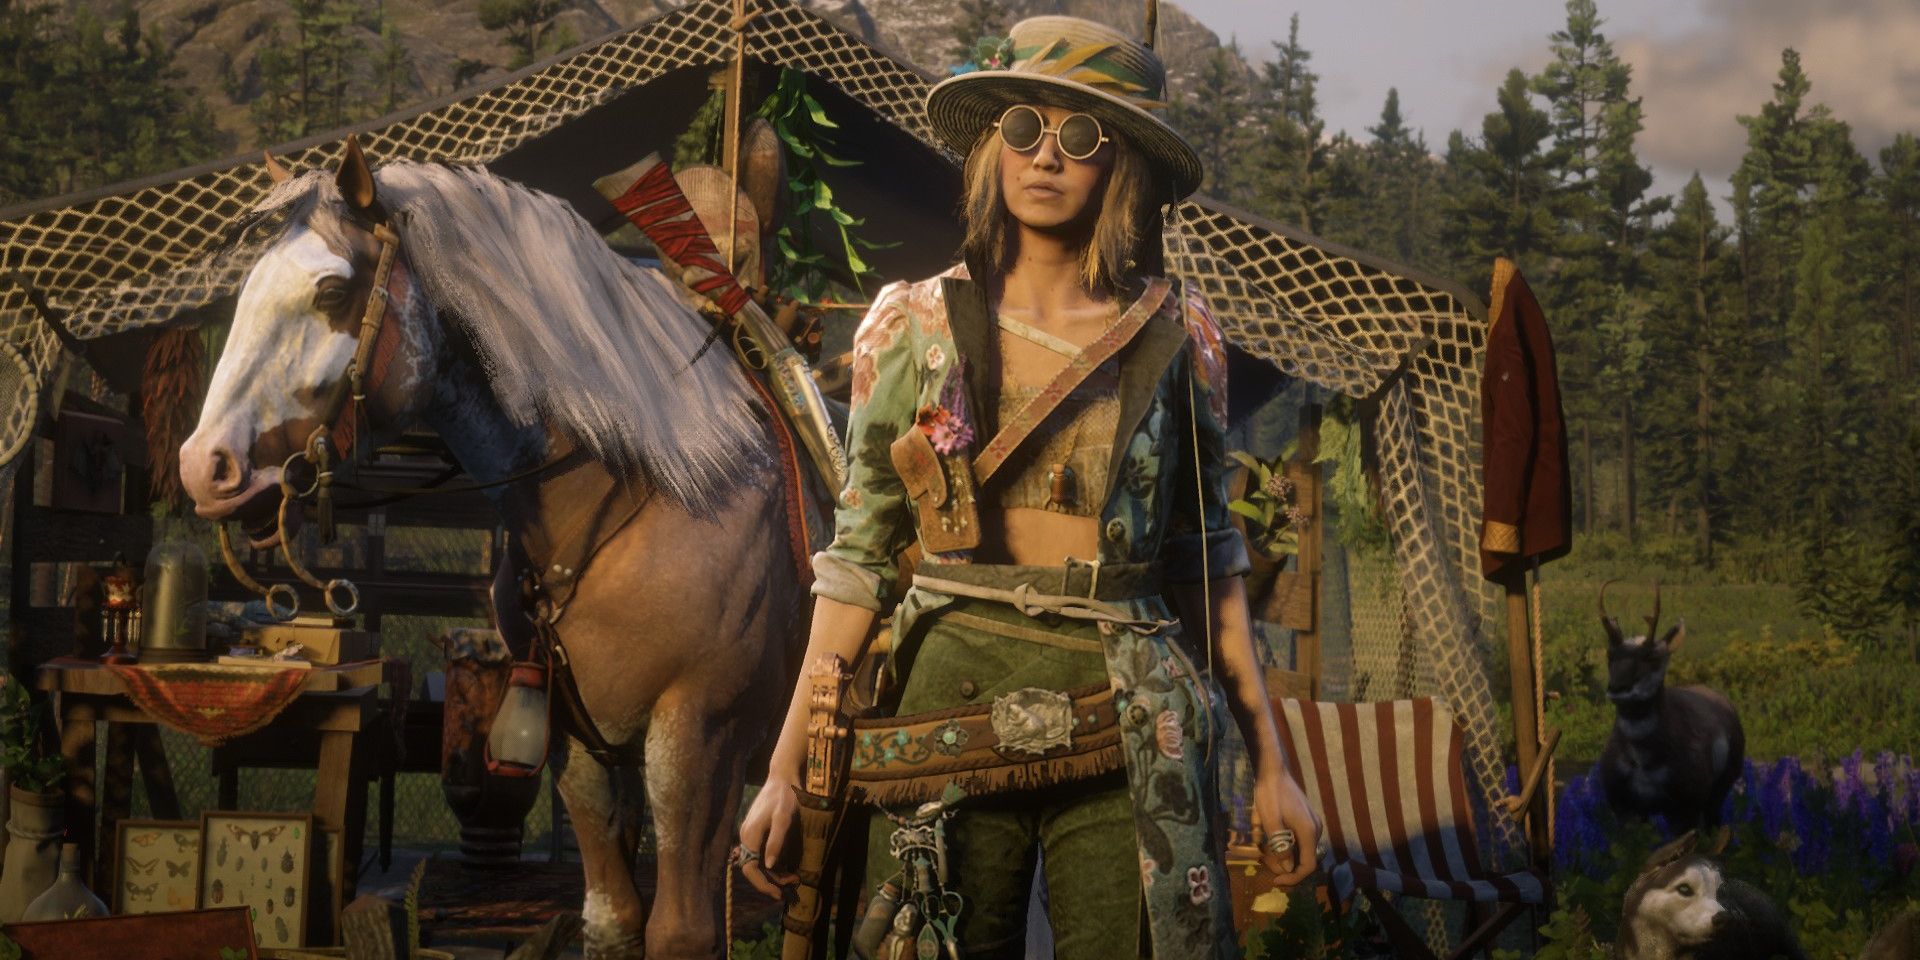 A Red Dead Online player character in front of a tent surrounded by some of the game's wildlife: a horse, a deer, and a dog